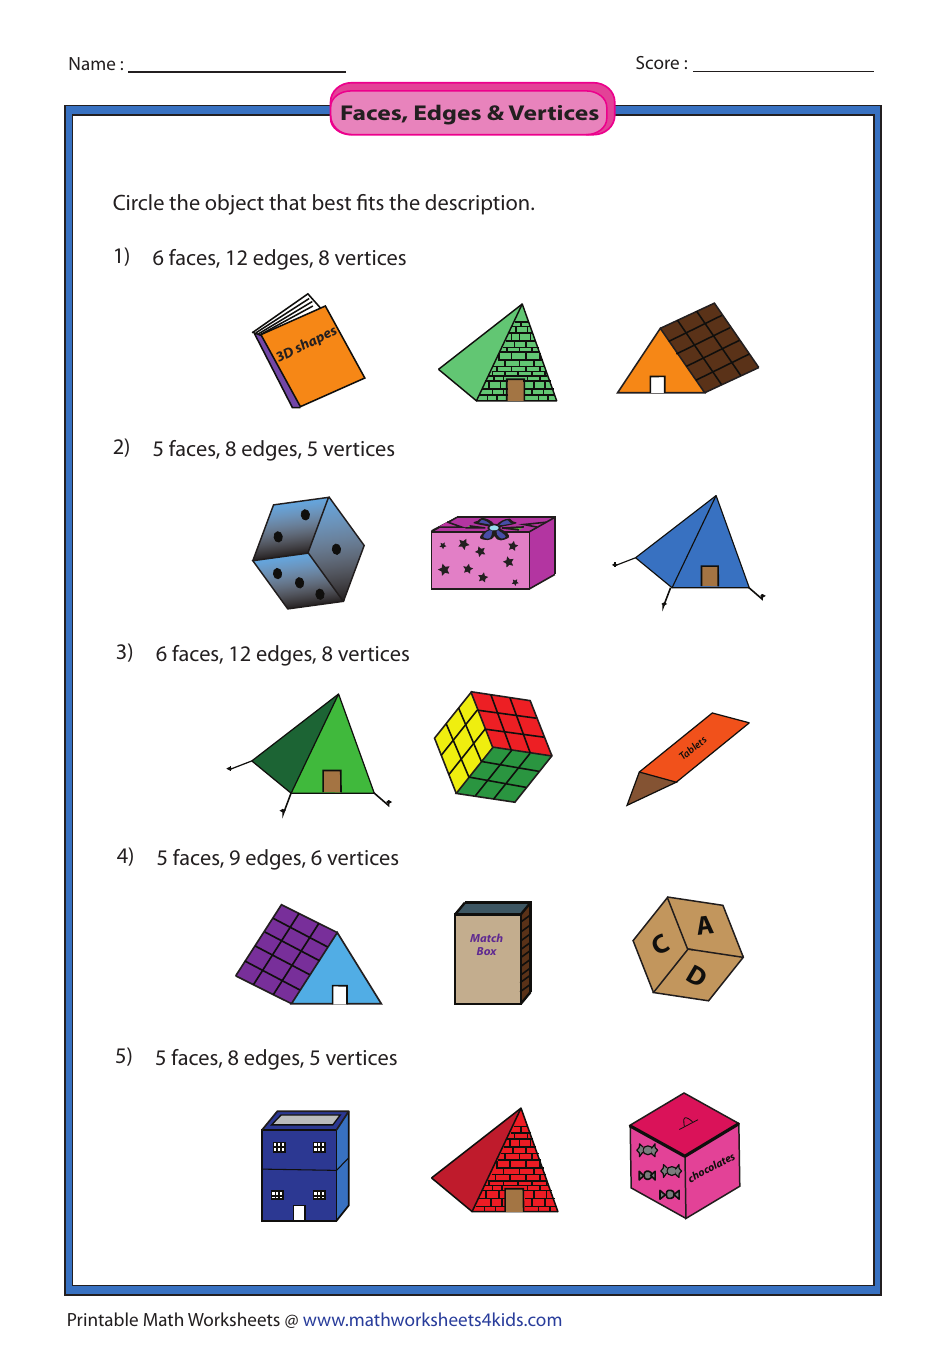 faces-edges-and-vertices-worksheet